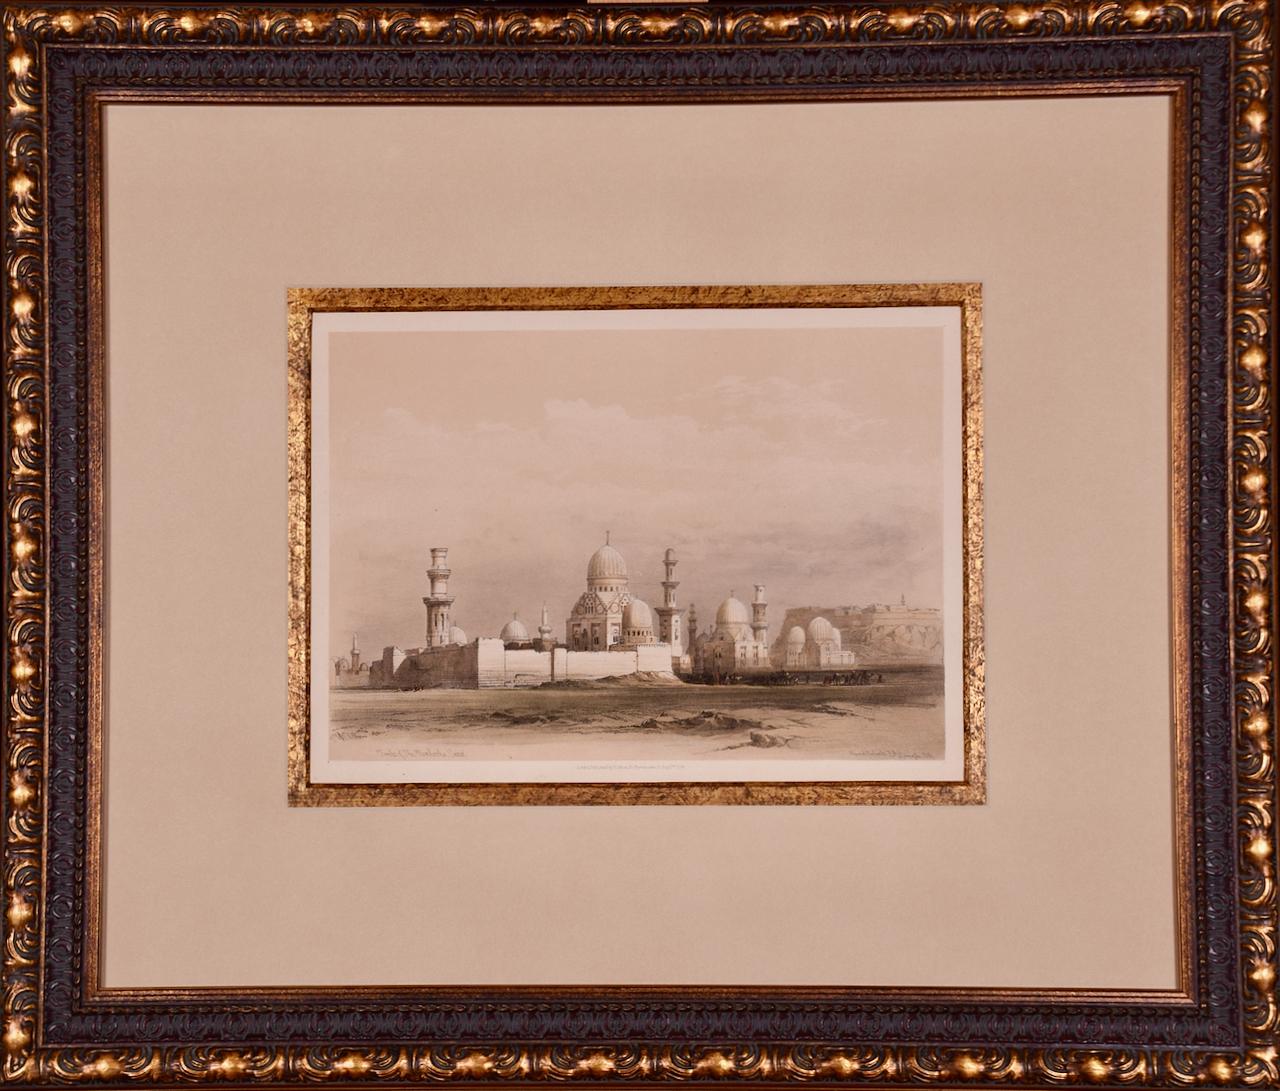 View of Cairo, Egypt: A 19th C. Framed Hand-colored Lithograph by David Roberts